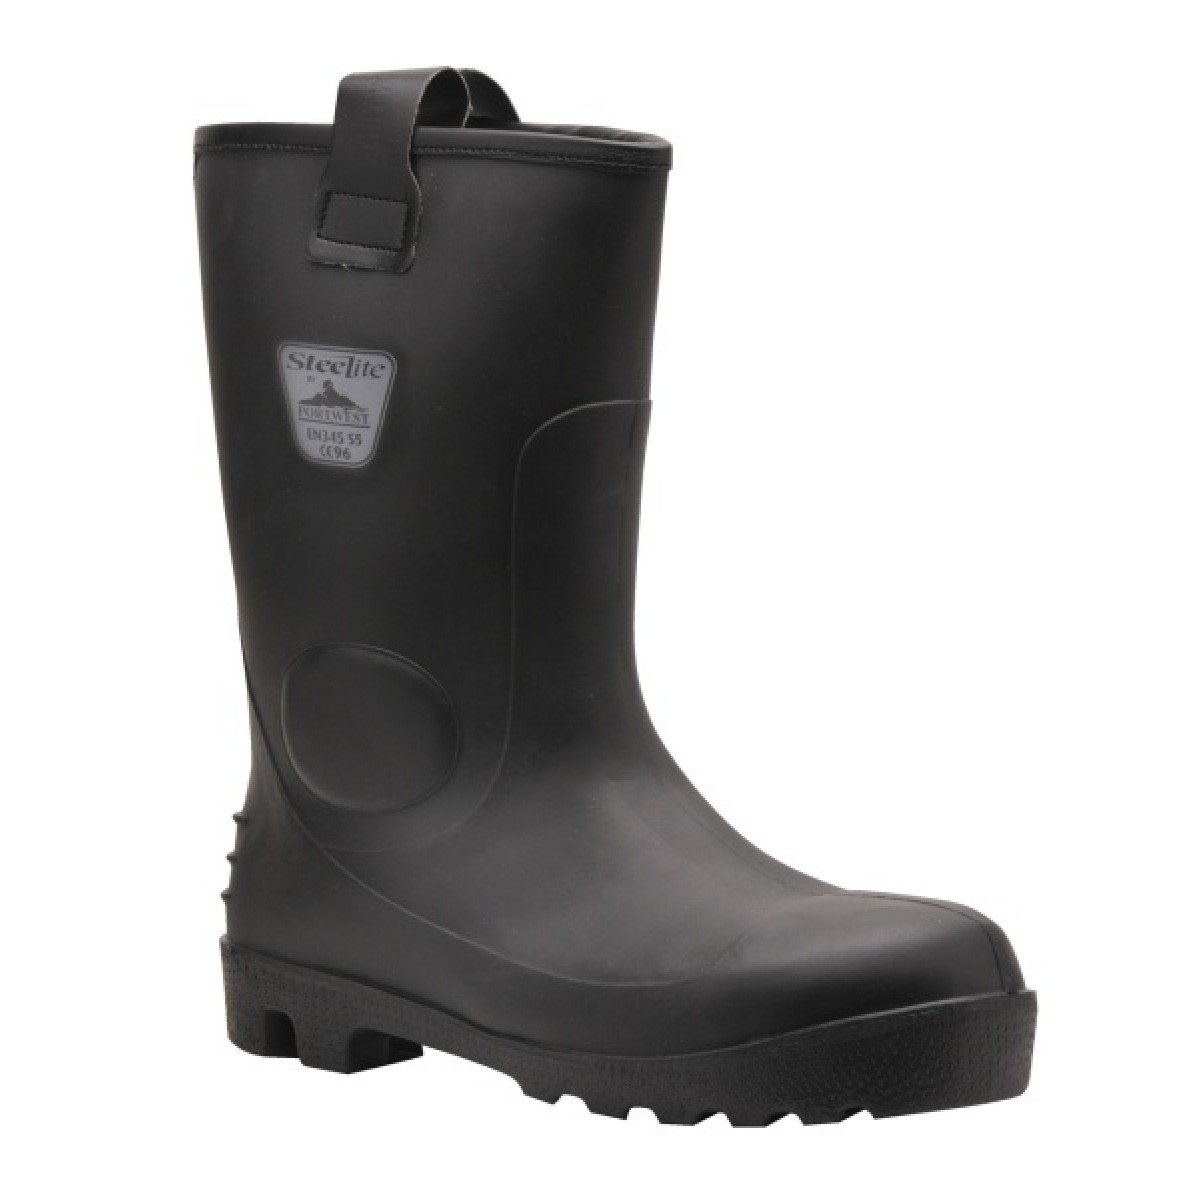 Neptune Safety Rigger Safety Boots S5 CI SRC